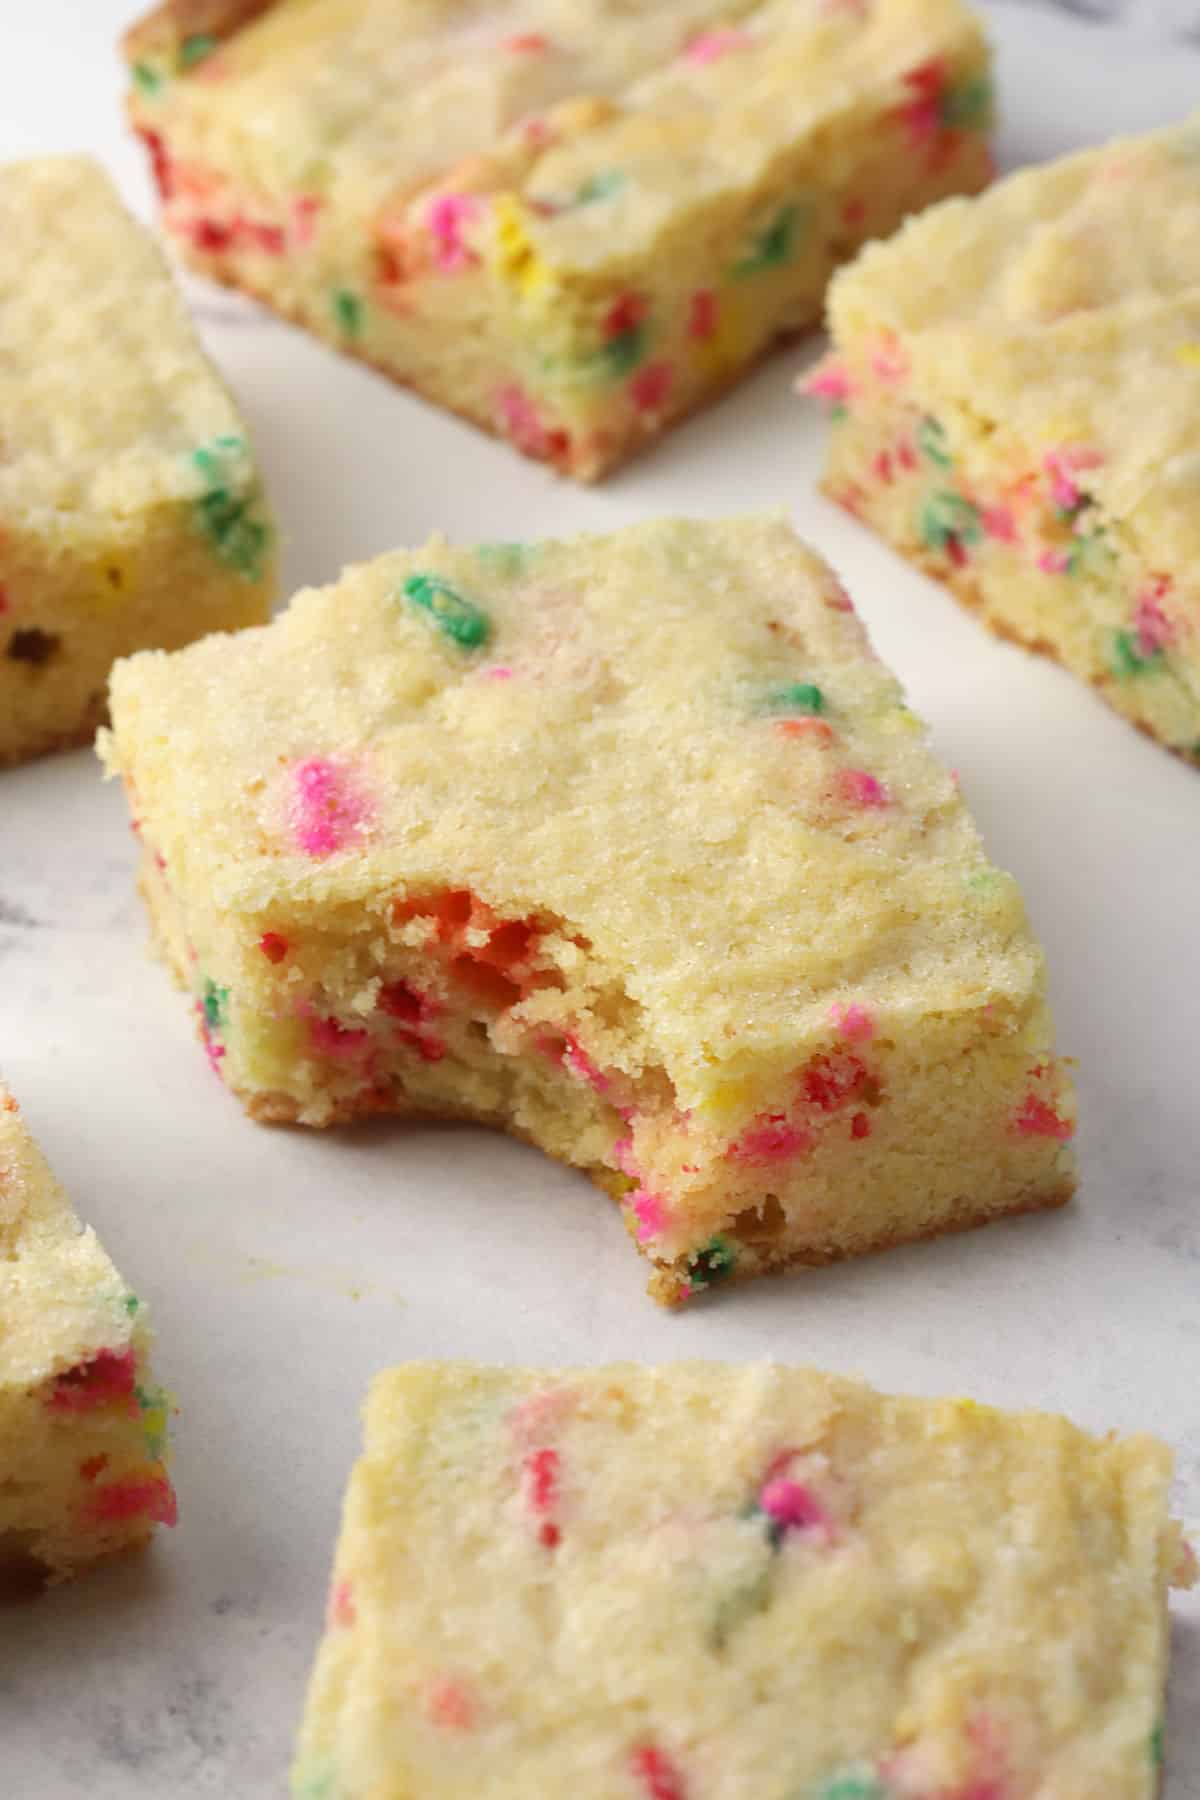 A funfetti sugar cookie square with a bite taken out.